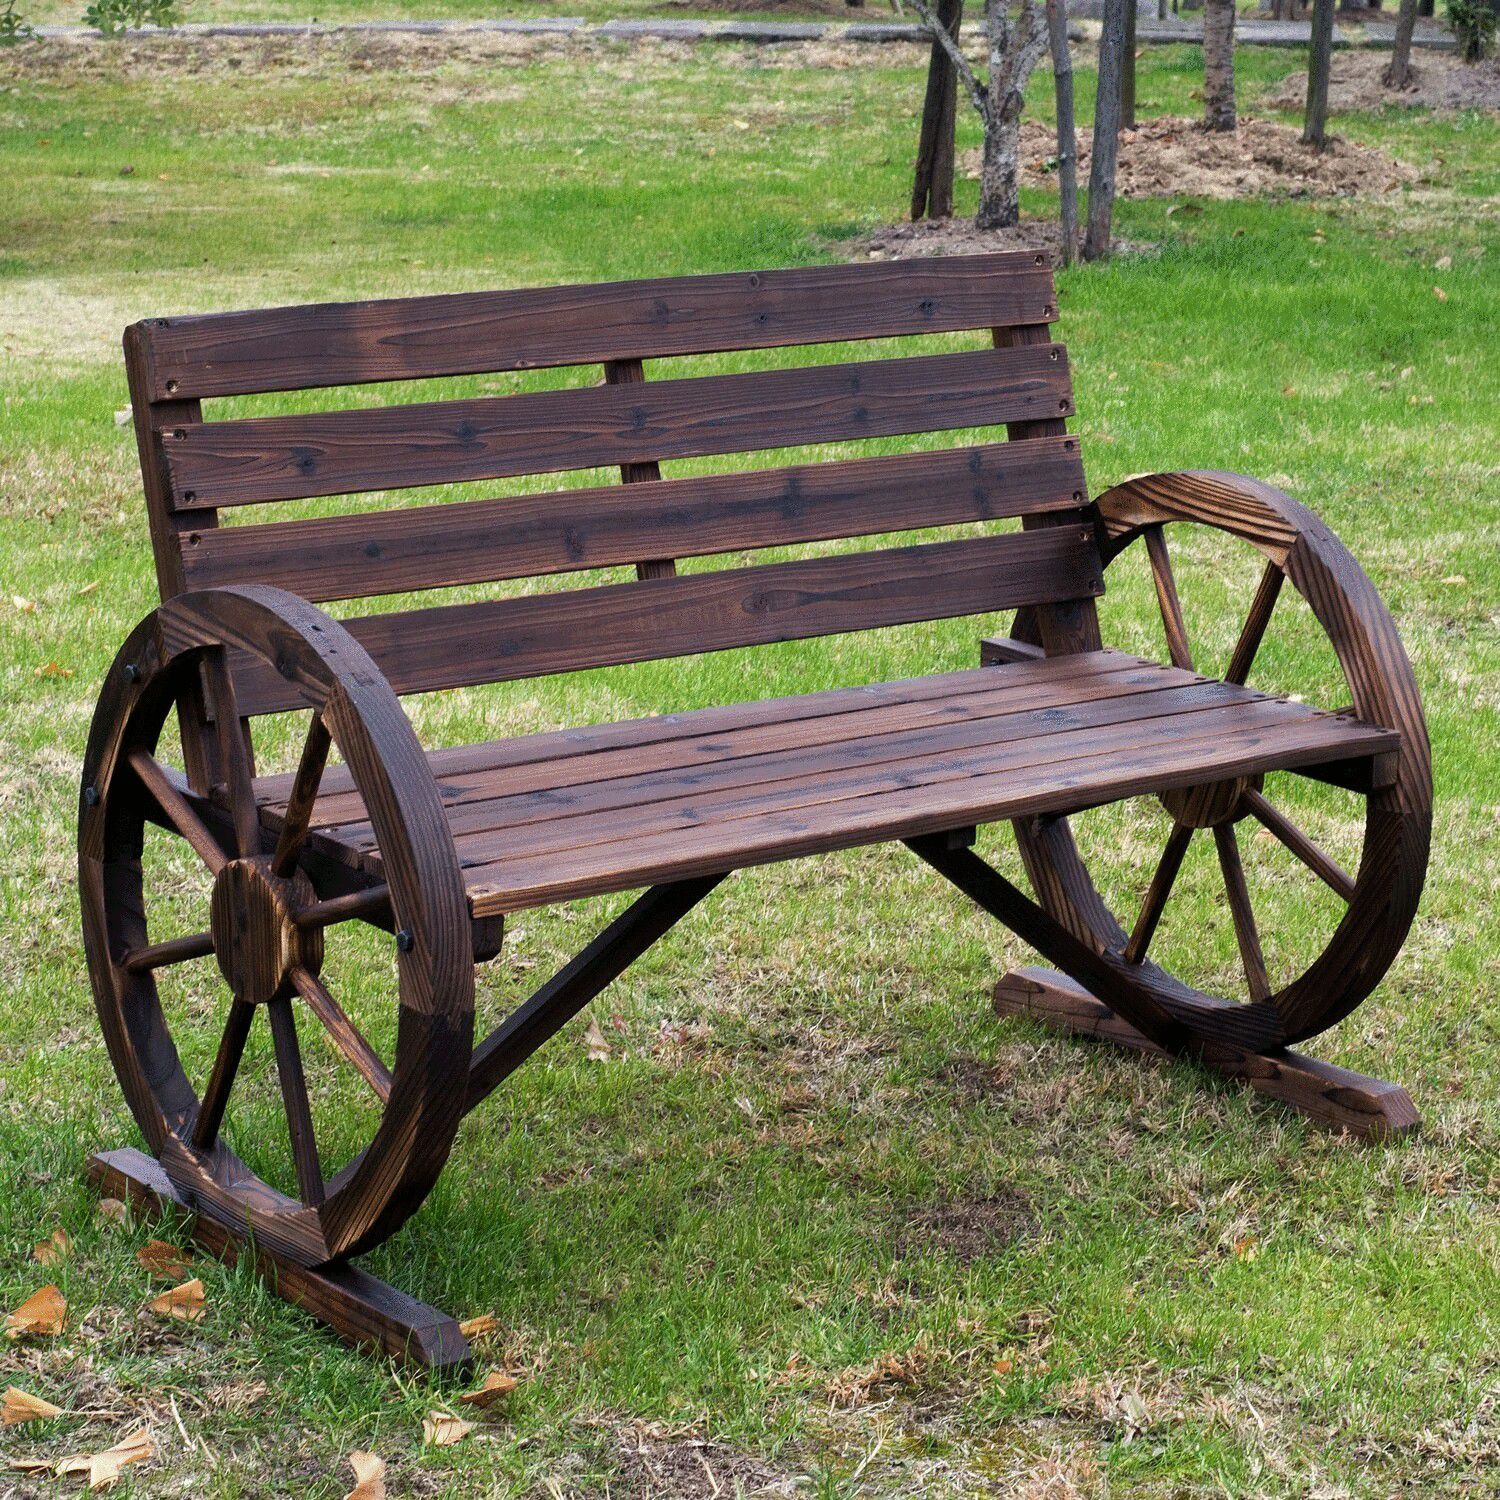 BRAND NEW!!! Rustic Wooden Outdoor Patio Wagon Wheel Bench Seat